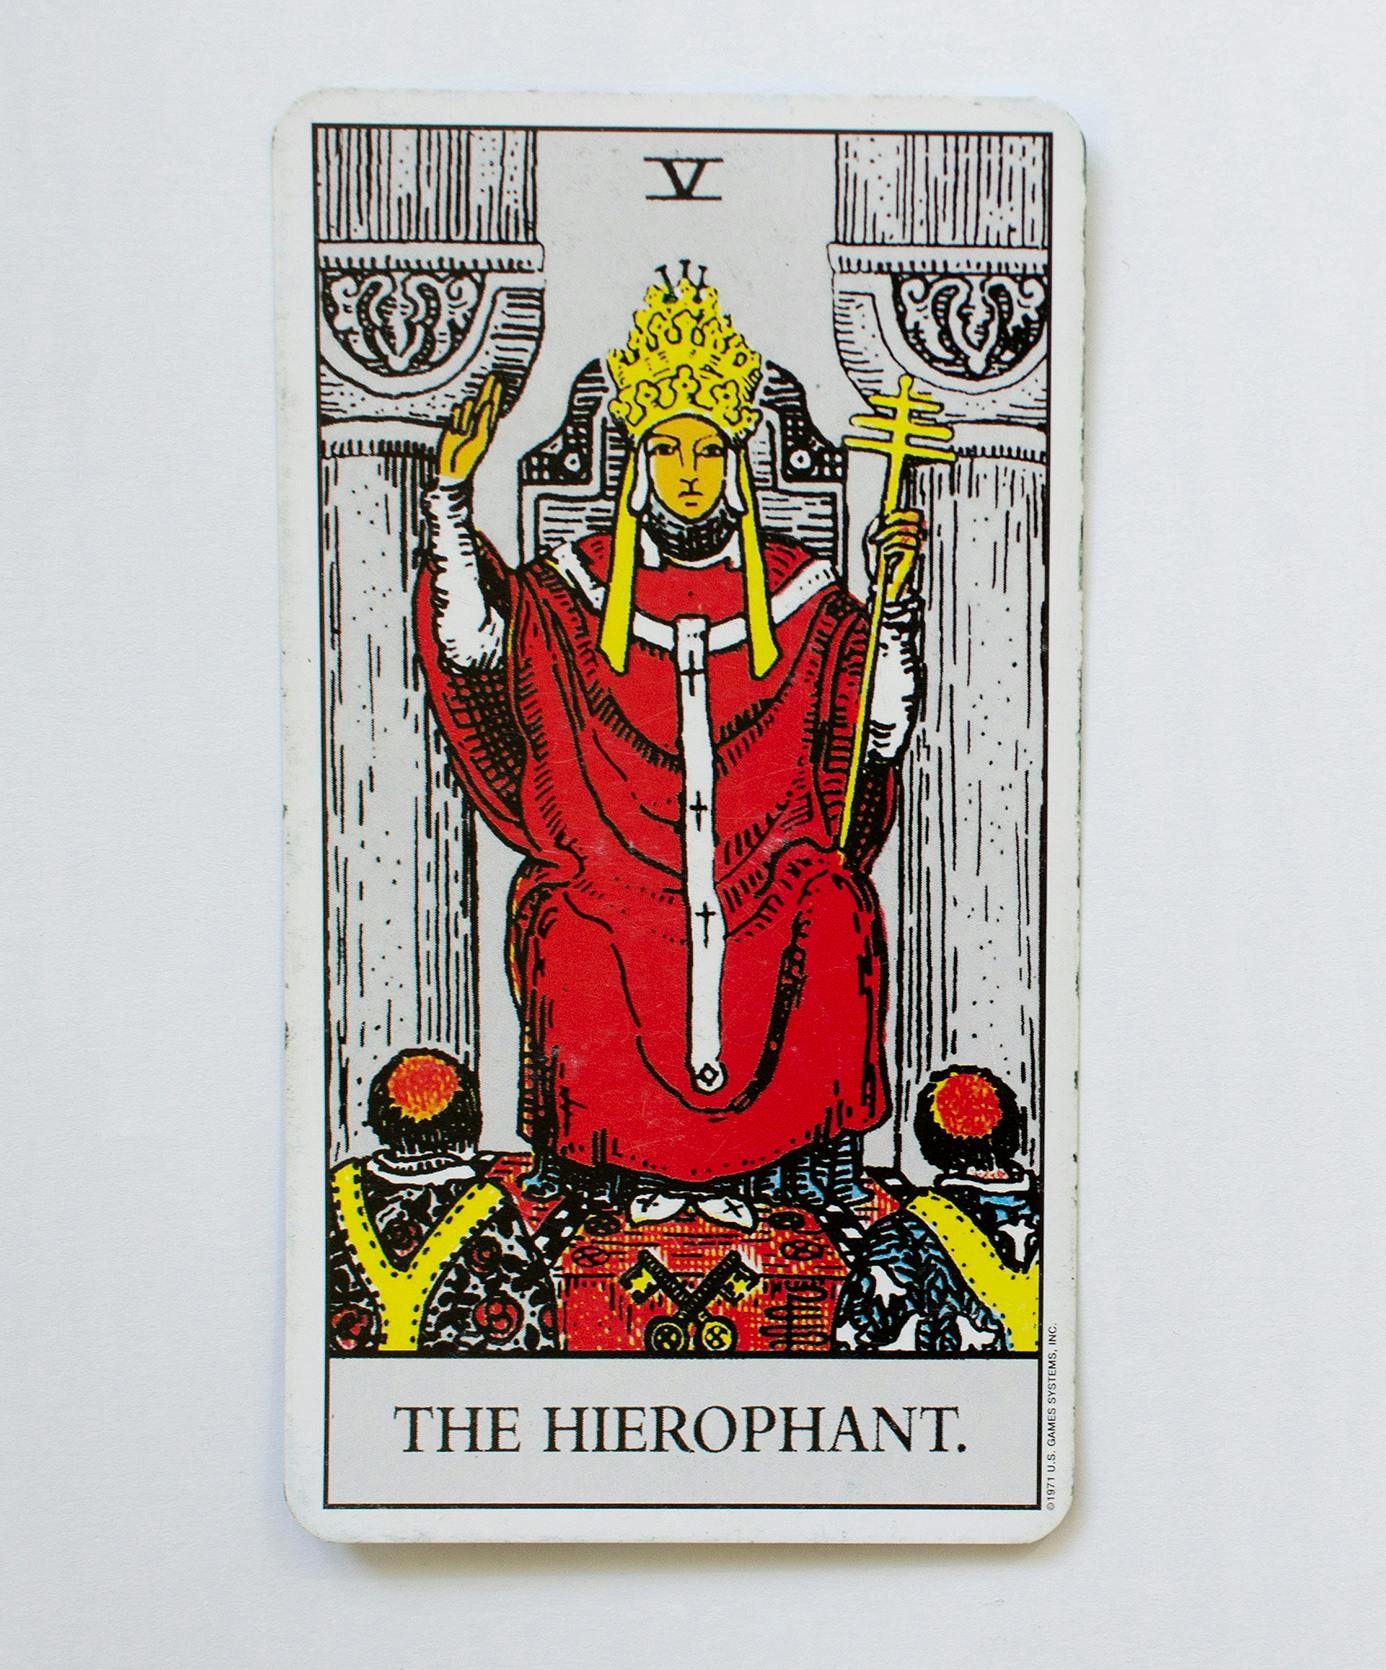 The Hierophant tarot card. Image of a person sitting in a throne between two pillars wearing a crown and red cape, with both hands raised one holding a scepter.